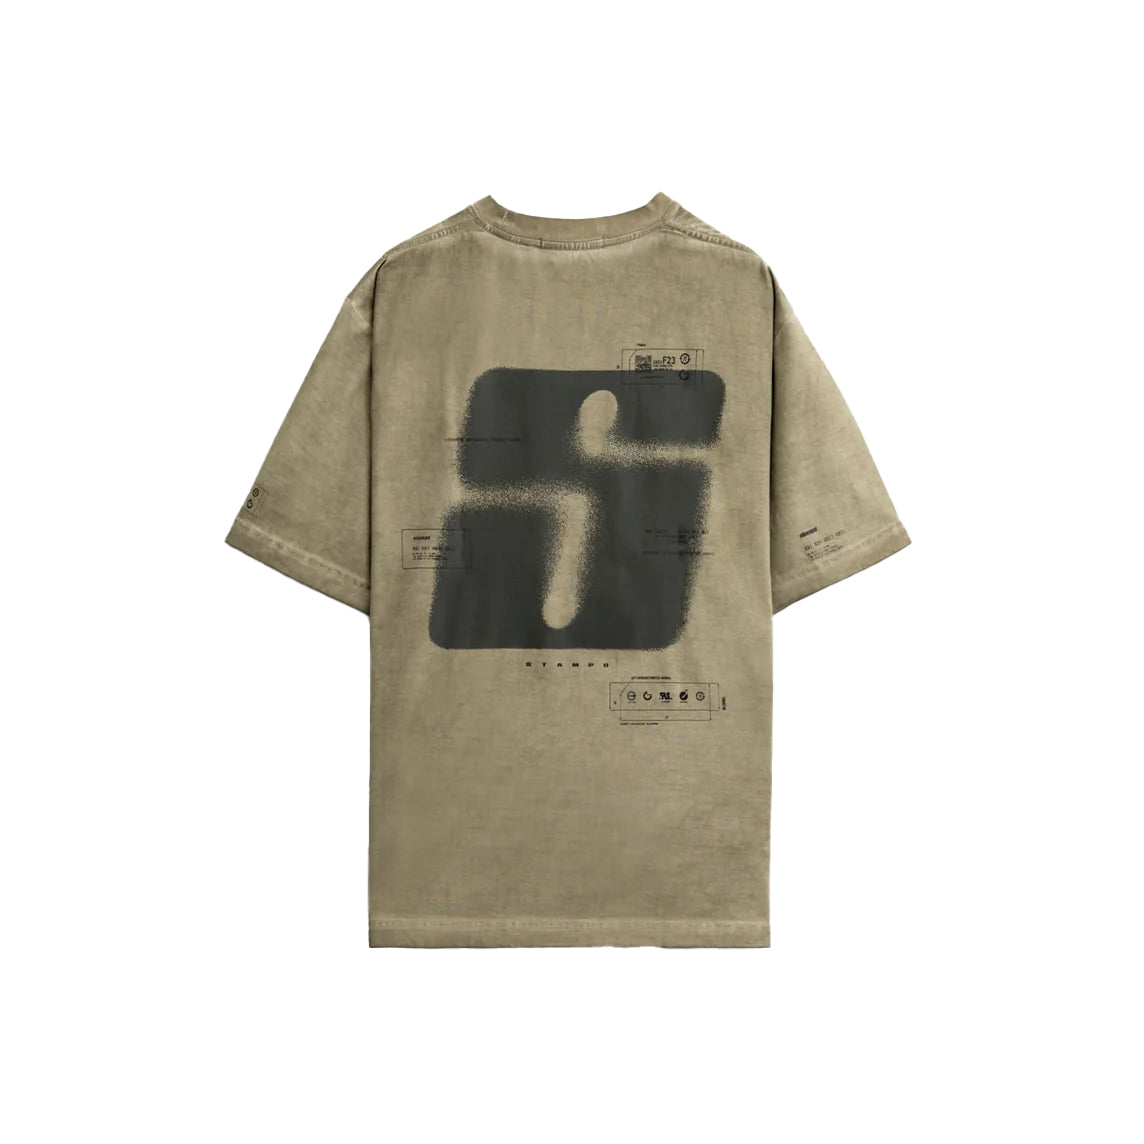 STAMPD Oil Washed Transit Relaxed Tee Khaki